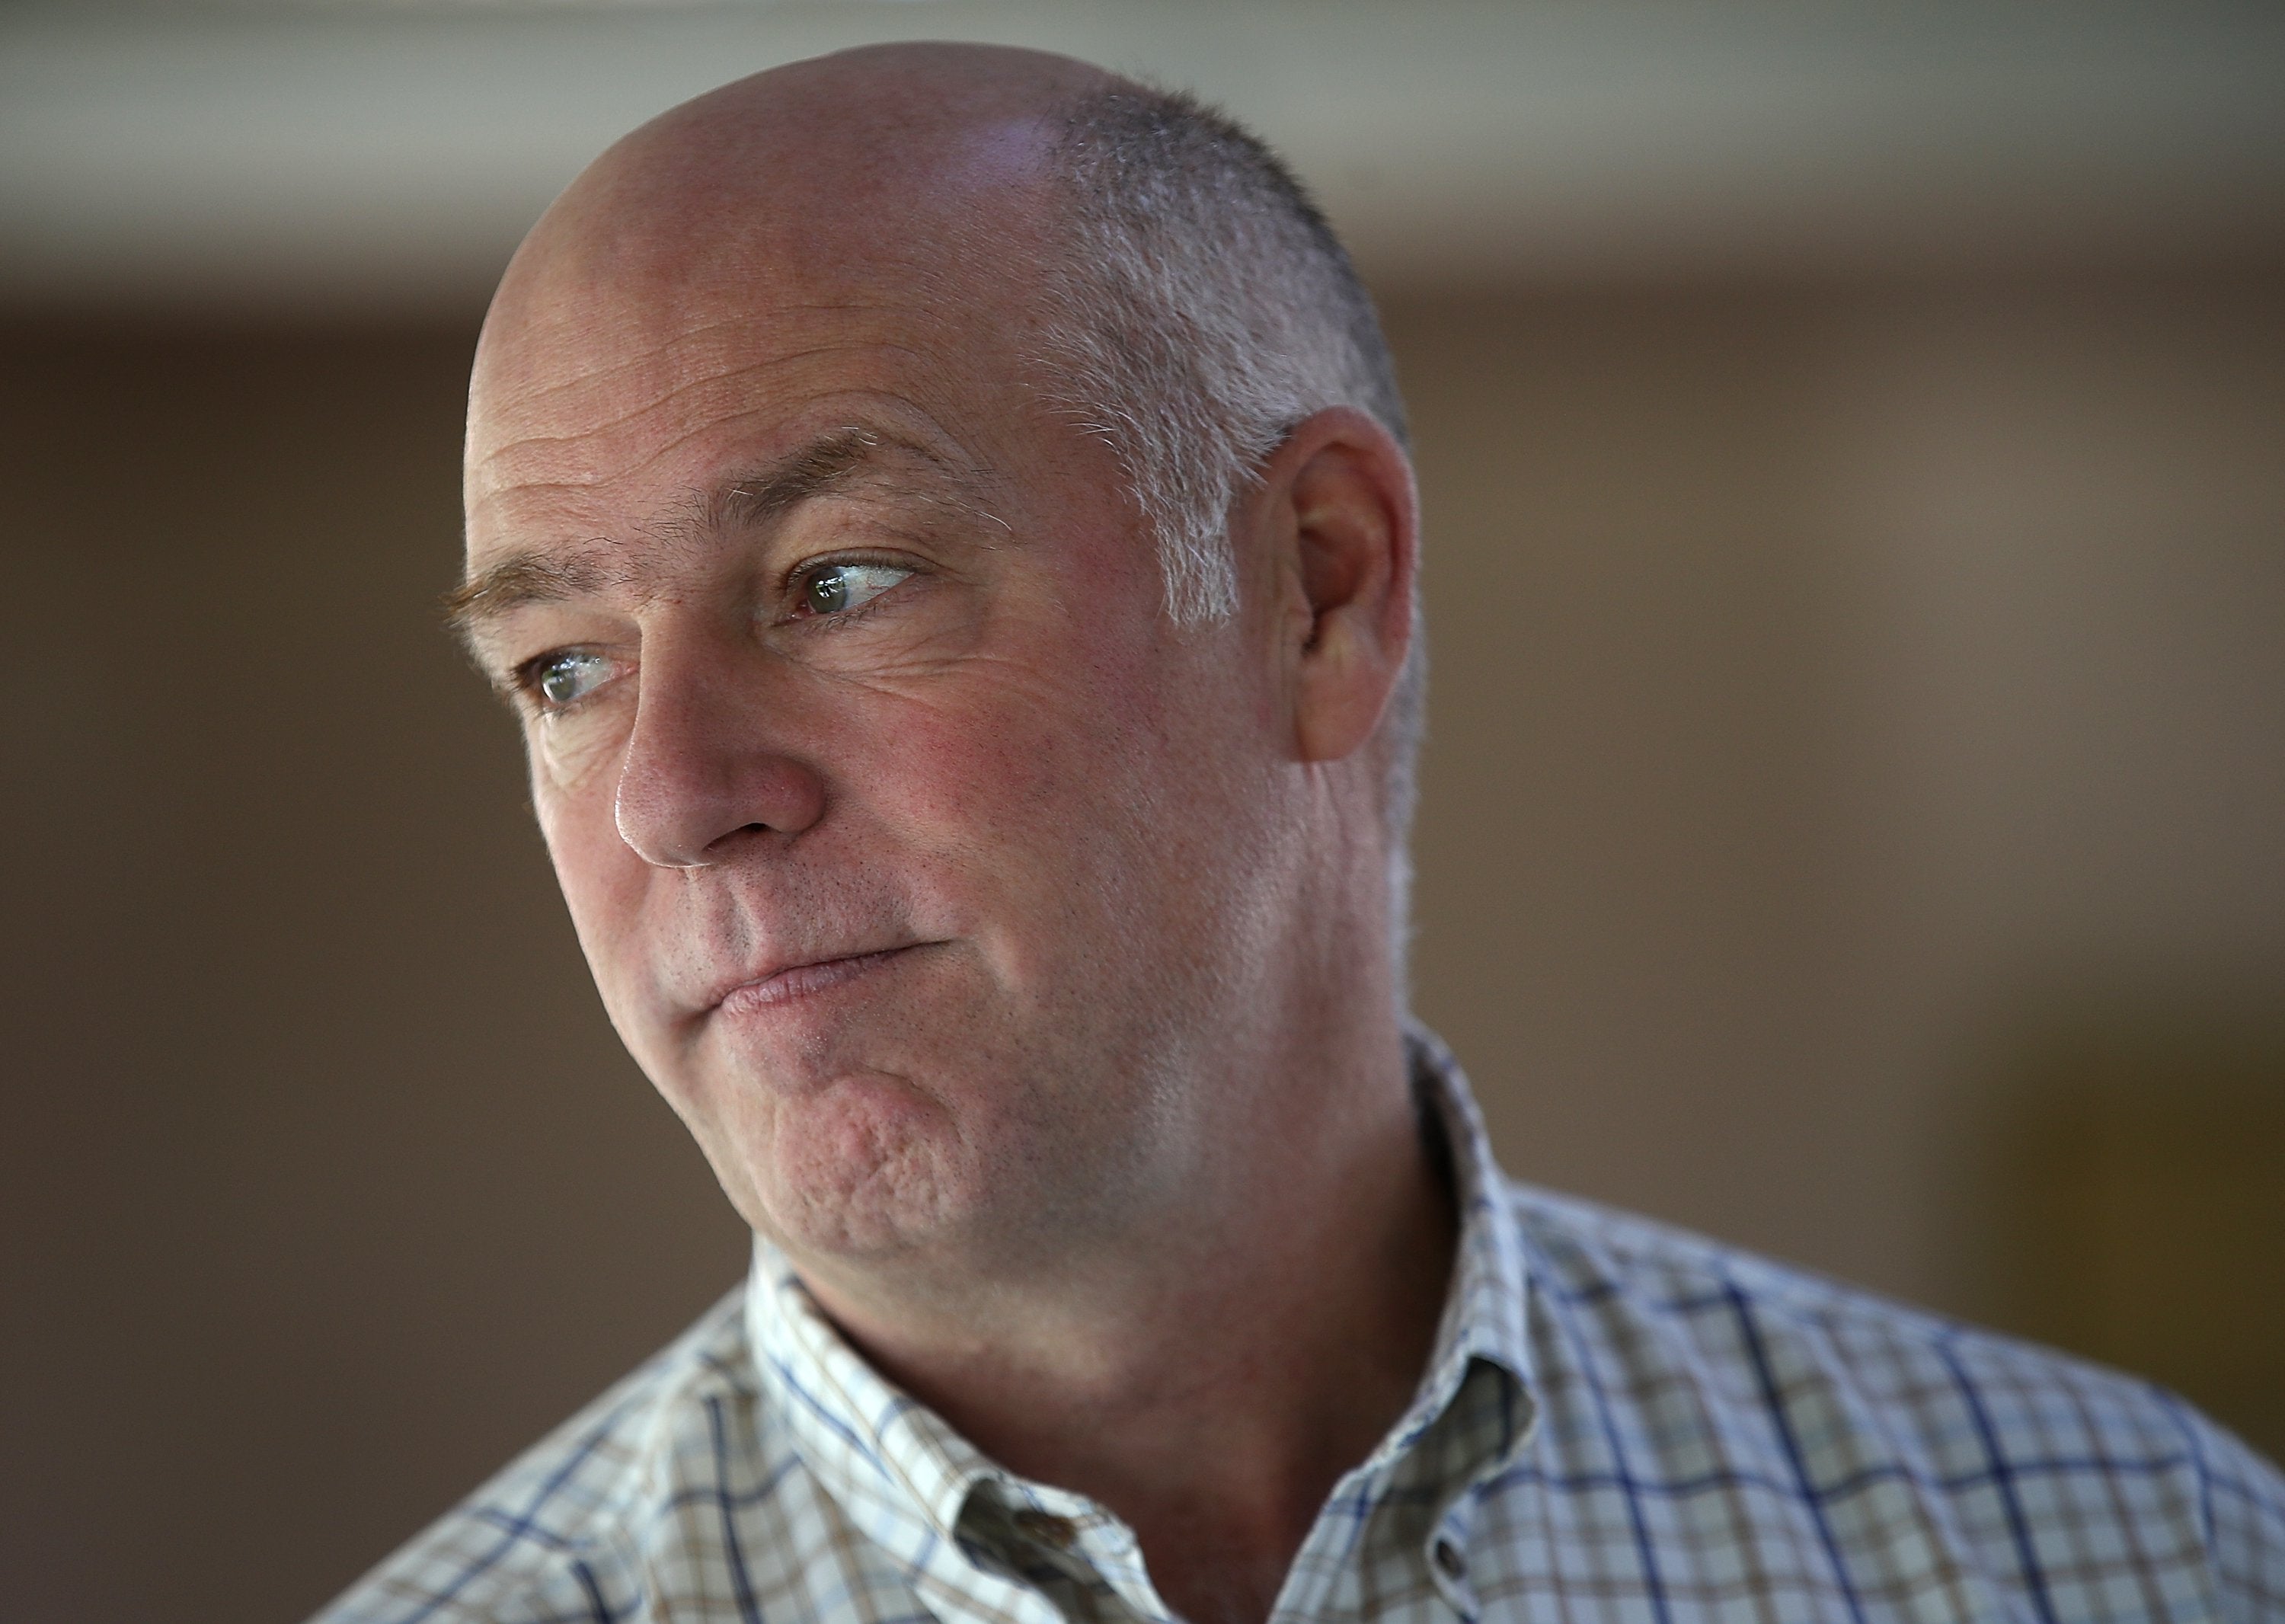 Greg Gianforte Apologizes for Allegedly Body-Slamming Reporter – After He Wins Montana Election